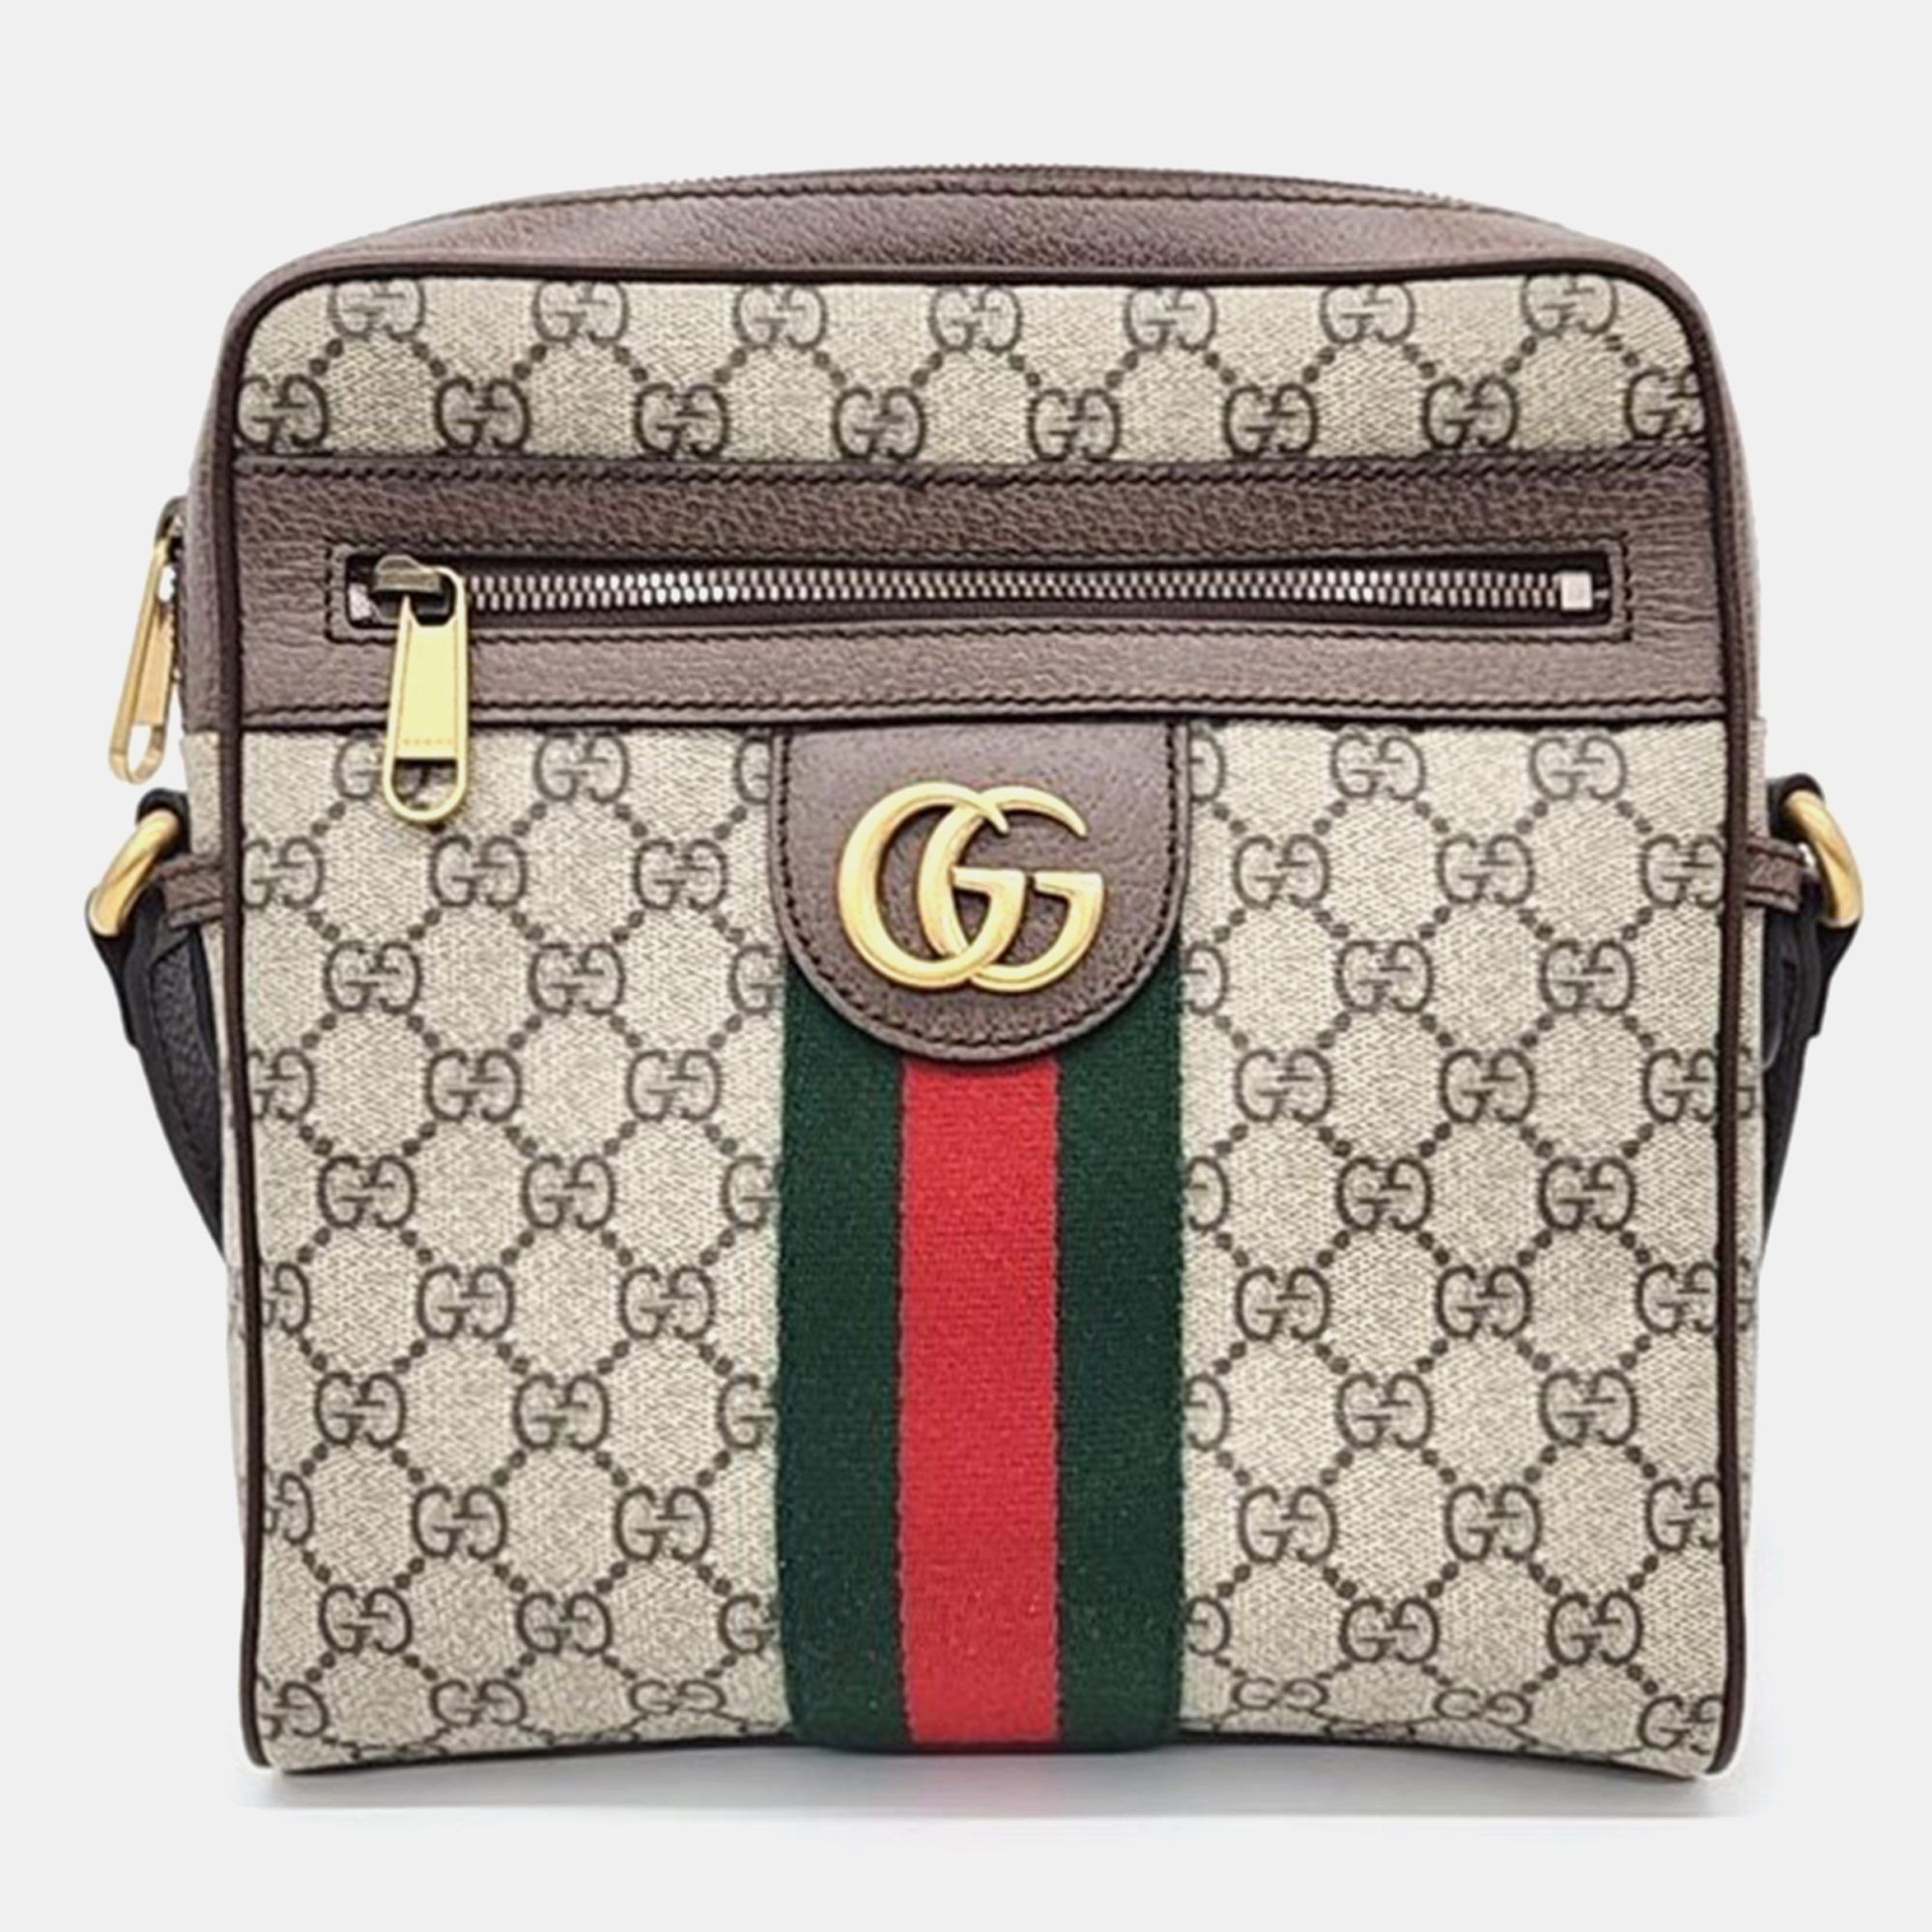 Experience luxury with this Gucci bag. Meticulously crafted with the best materials its a timeless piece that will elevate any outfit.